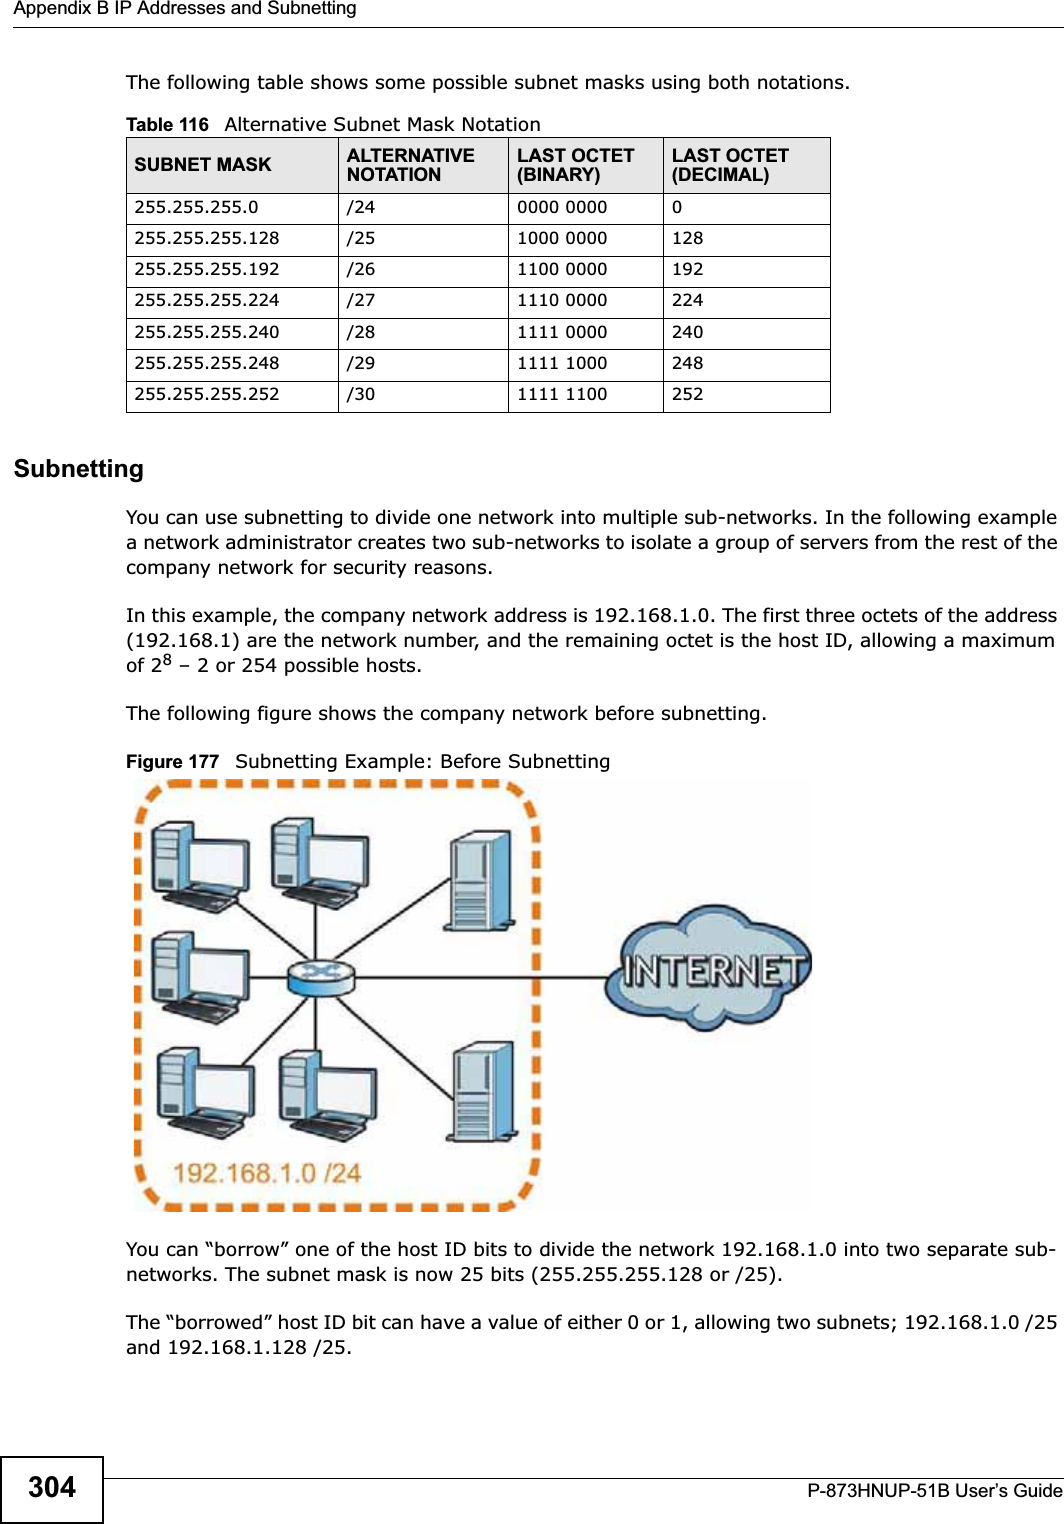 Appendix B IP Addresses and SubnettingP-873HNUP-51B User’s Guide304The following table shows some possible subnet masks using both notations. SubnettingYou can use subnetting to divide one network into multiple sub-networks. In the following example a network administrator creates two sub-networks to isolate a group of servers from the rest of the company network for security reasons.In this example, the company network address is 192.168.1.0. The first three octets of the address (192.168.1) are the network number, and the remaining octet is the host ID, allowing a maximum of 28 – 2 or 254 possible hosts.The following figure shows the company network before subnetting. Figure 177   Subnetting Example: Before SubnettingYou can “borrow” one of the host ID bits to divide the network 192.168.1.0 into two separate sub-networks. The subnet mask is now 25 bits (255.255.255.128 or /25).The “borrowed” host ID bit can have a value of either 0 or 1, allowing two subnets; 192.168.1.0 /25 and 192.168.1.128 /25. Table 116   Alternative Subnet Mask NotationSUBNET MASK ALTERNATIVE NOTATIONLAST OCTET (BINARY)LAST OCTET (DECIMAL)255.255.255.0 /24 0000 0000 0255.255.255.128 /25 1000 0000 128255.255.255.192 /26 1100 0000 192255.255.255.224 /27 1110 0000 224255.255.255.240 /28 1111 0000 240255.255.255.248 /29 1111 1000 248255.255.255.252 /30 1111 1100 252